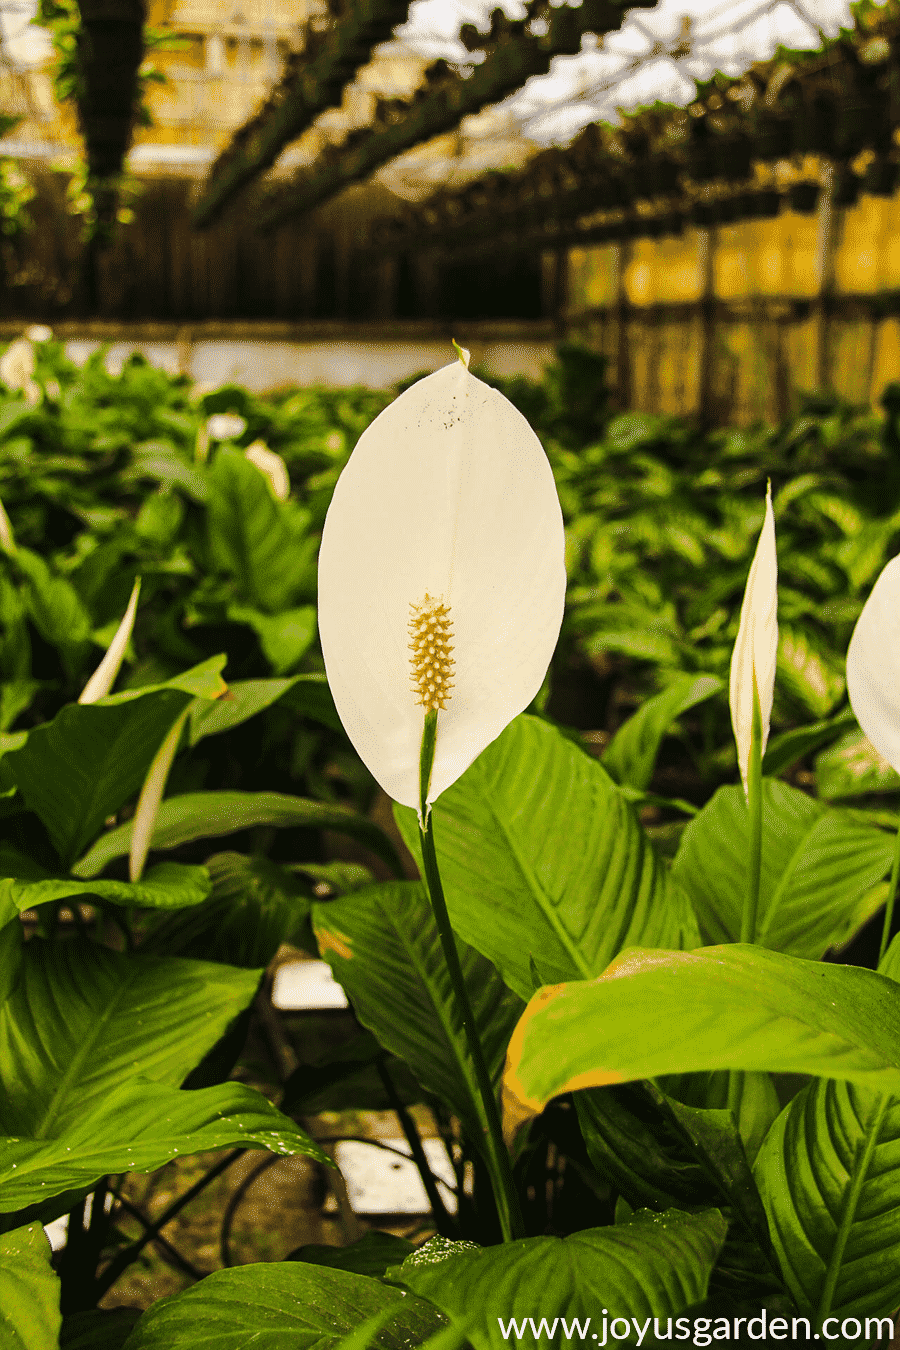 A white peace lily flower with other peace lilies in the background.